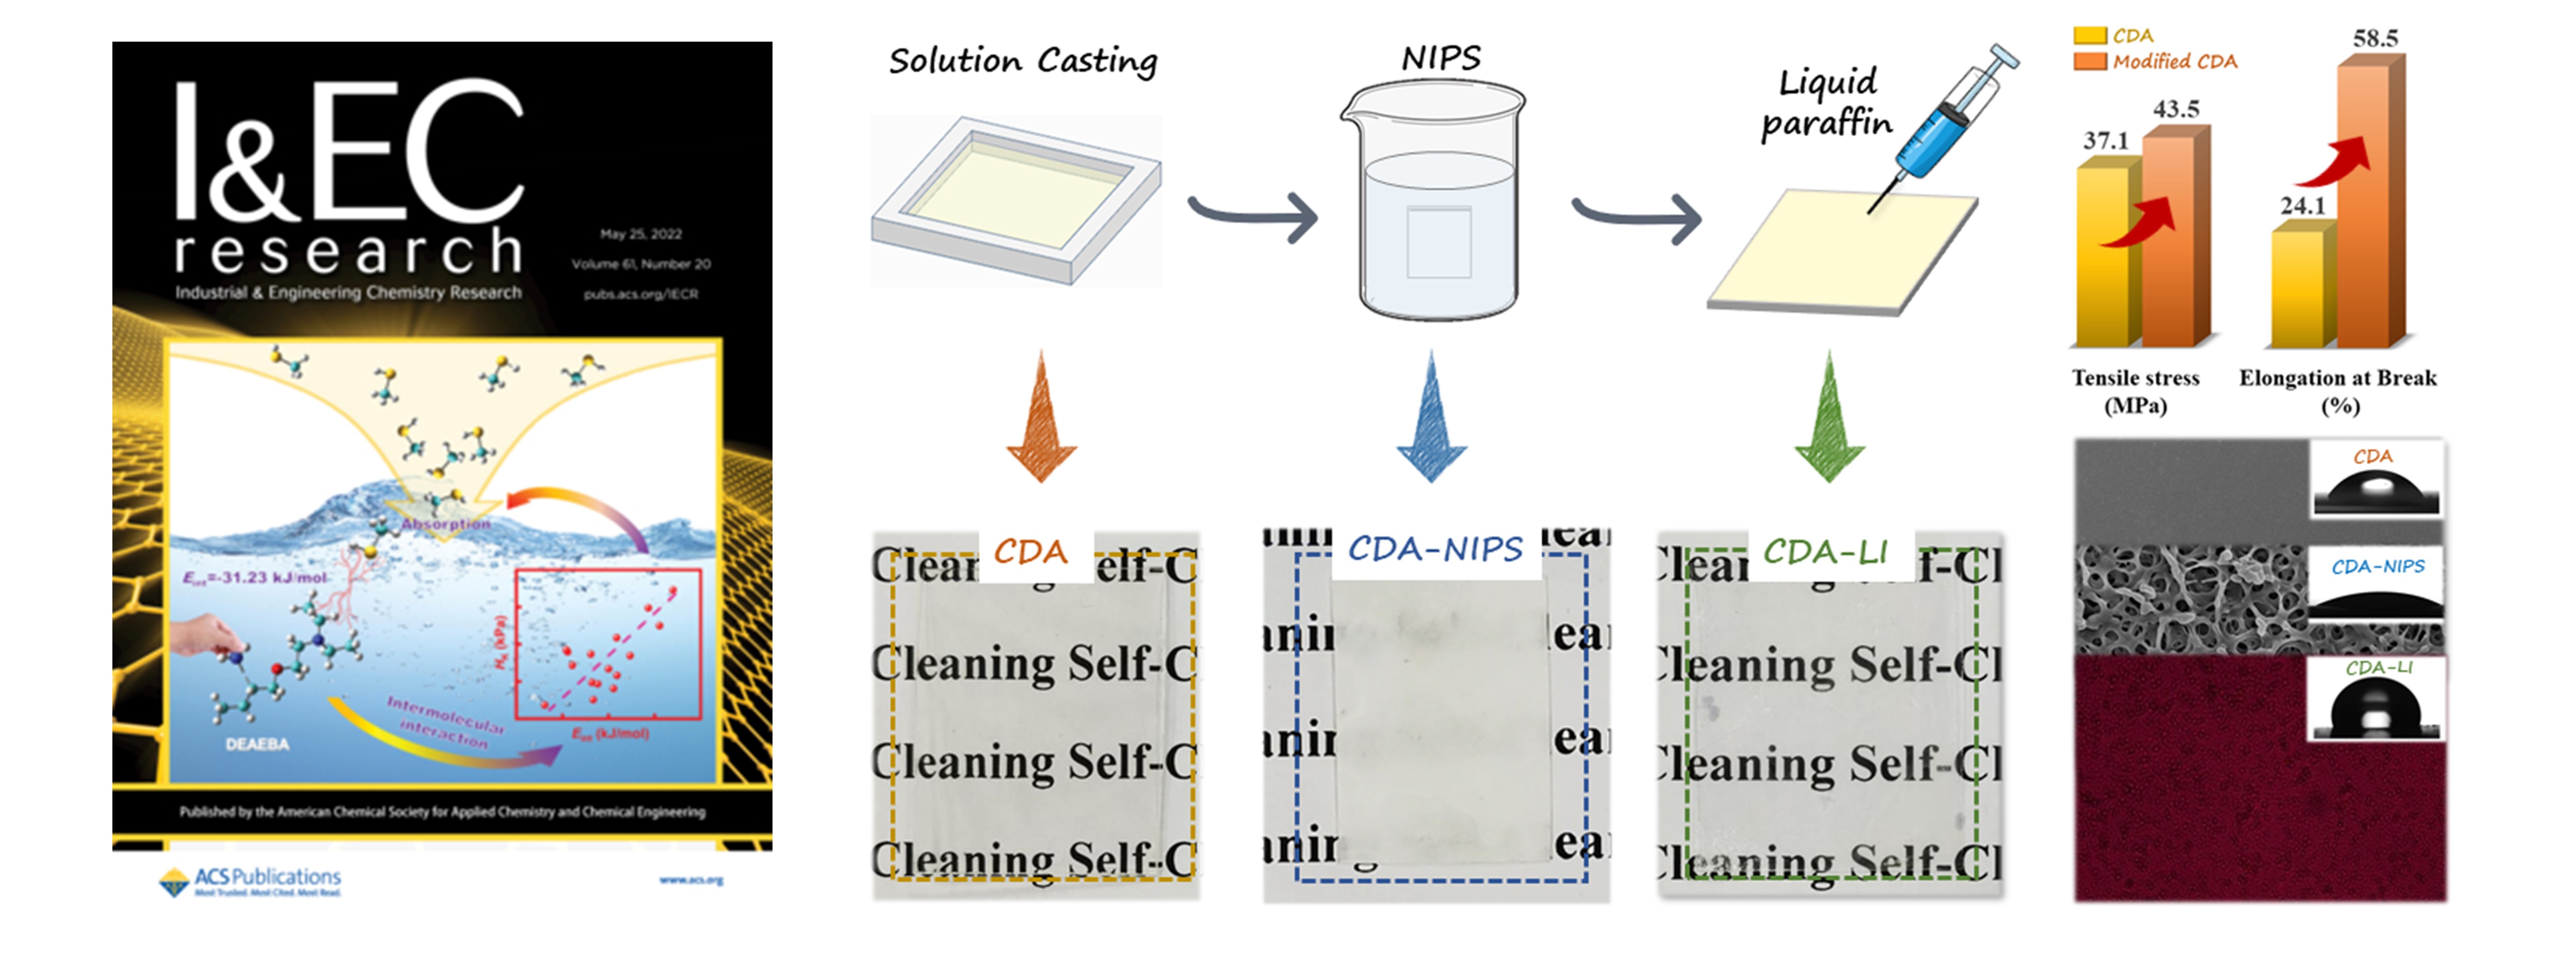 Imparting Cellulose Acetate Films with Hydrophobicity, High Transparency and Self-Cleaning Function by Constructing a Slippery Liquid-Infused Porous Surface